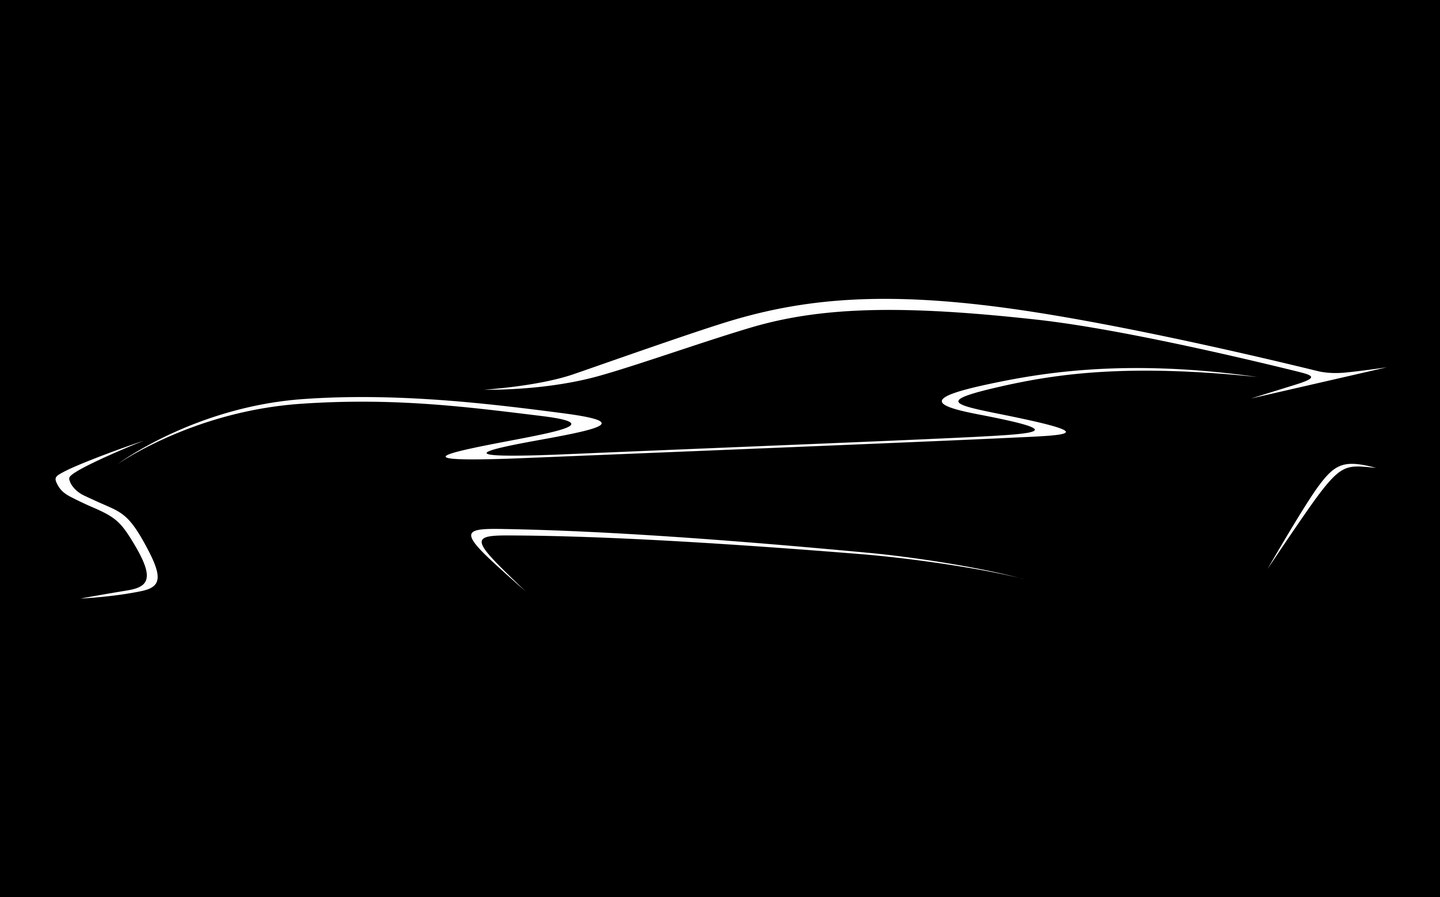 Aston Martin teases new 2025 electric car developed in conjunction with Lucid